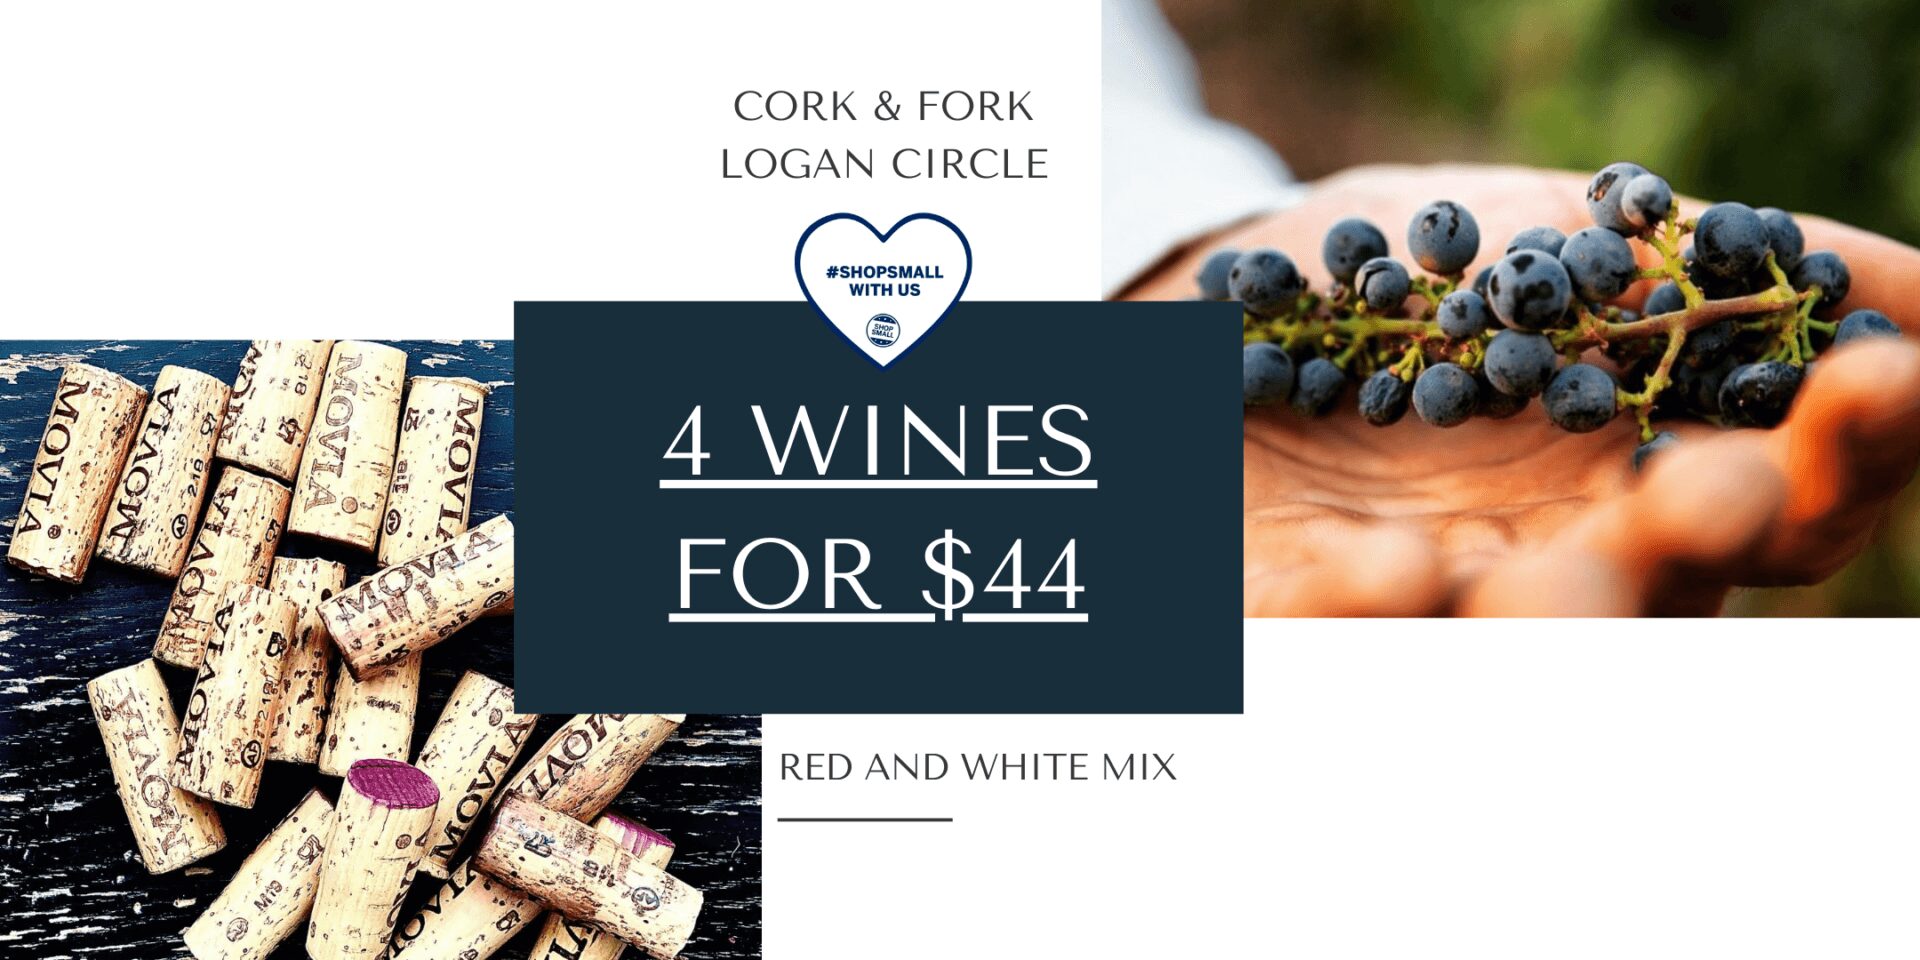 Red and white mix wine deals